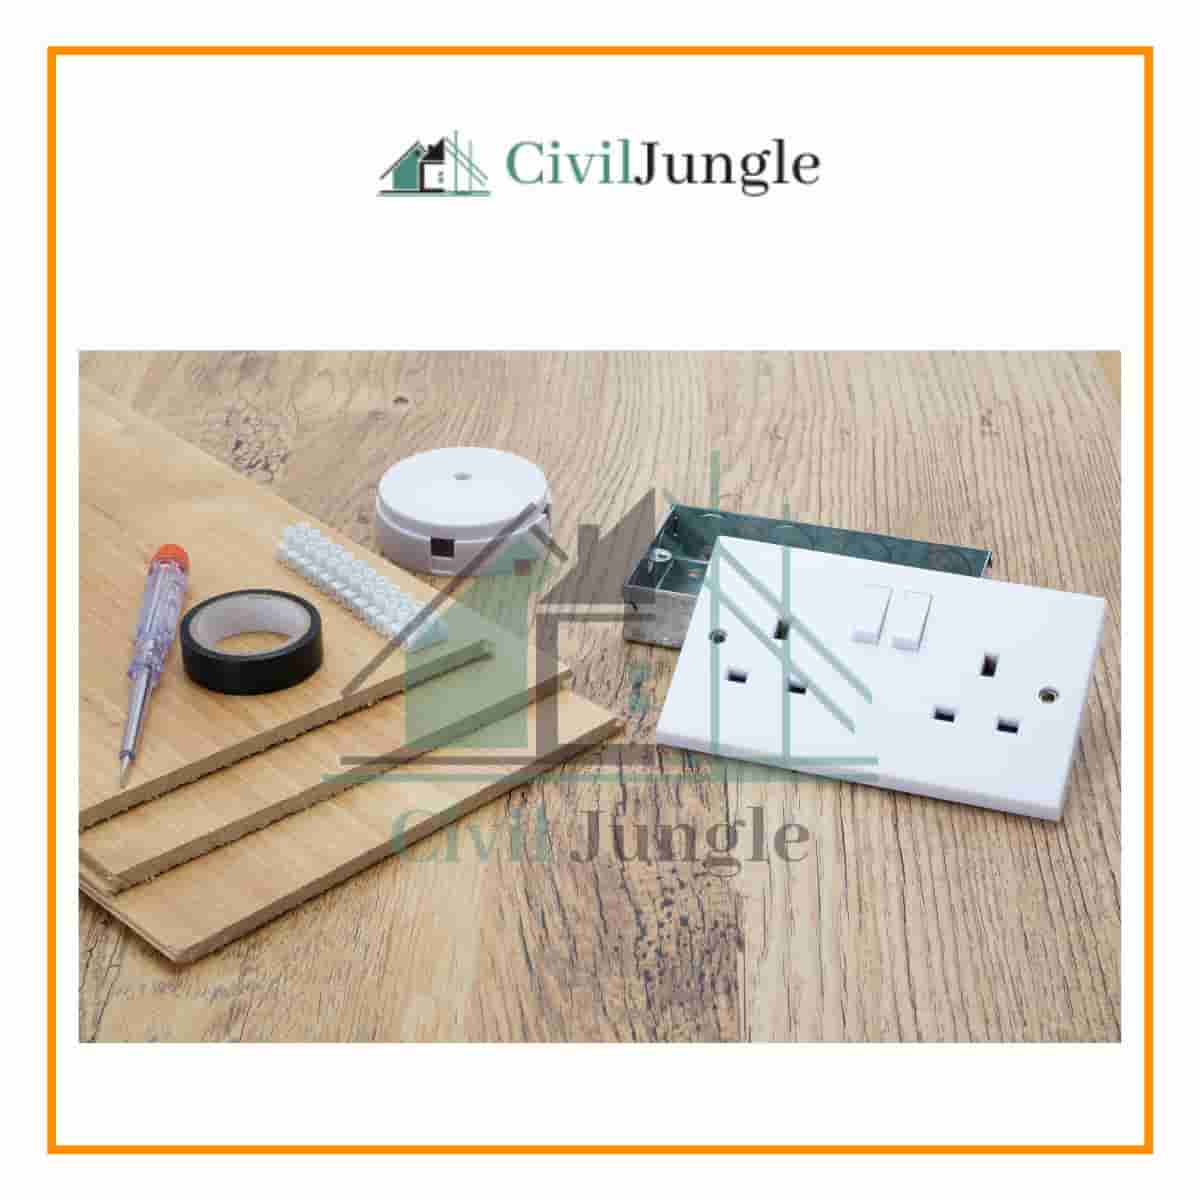 Construction Material: Electrical Items